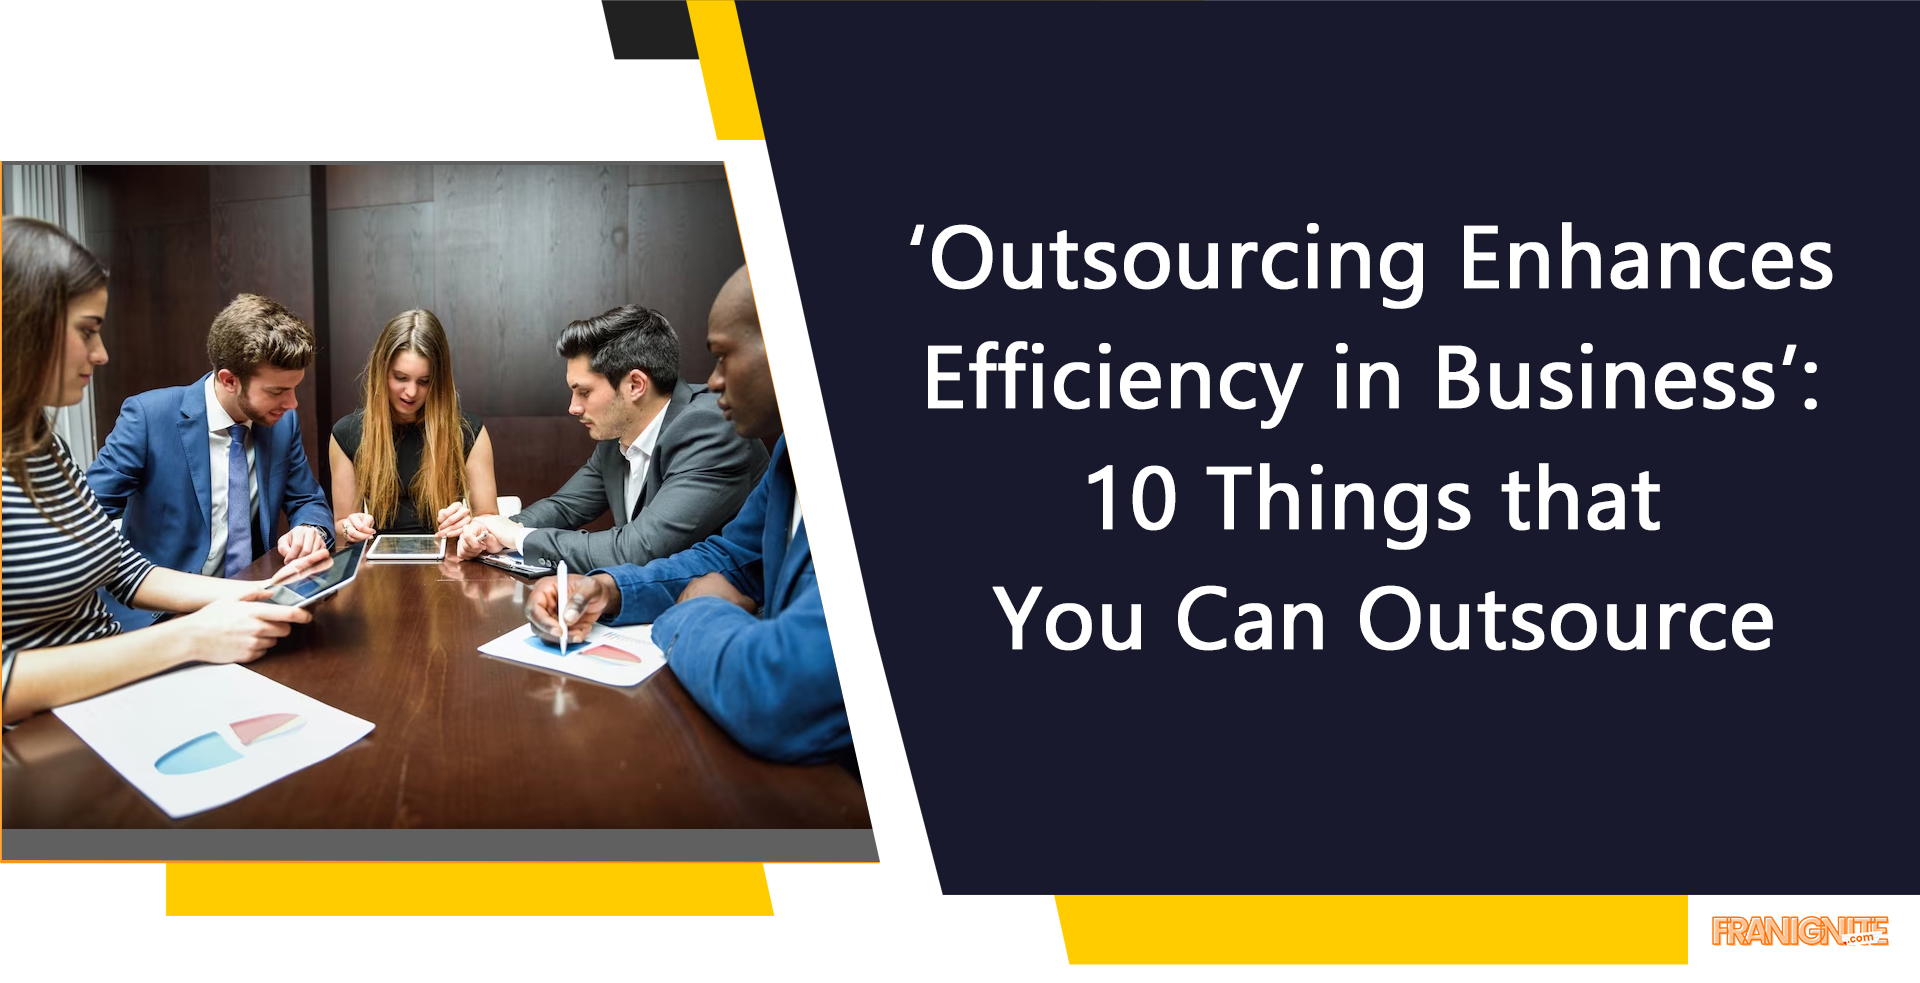 You are currently viewing ‘Outsourcing Enhances Efficiency in Business’: 10 Things that You Can Outsource